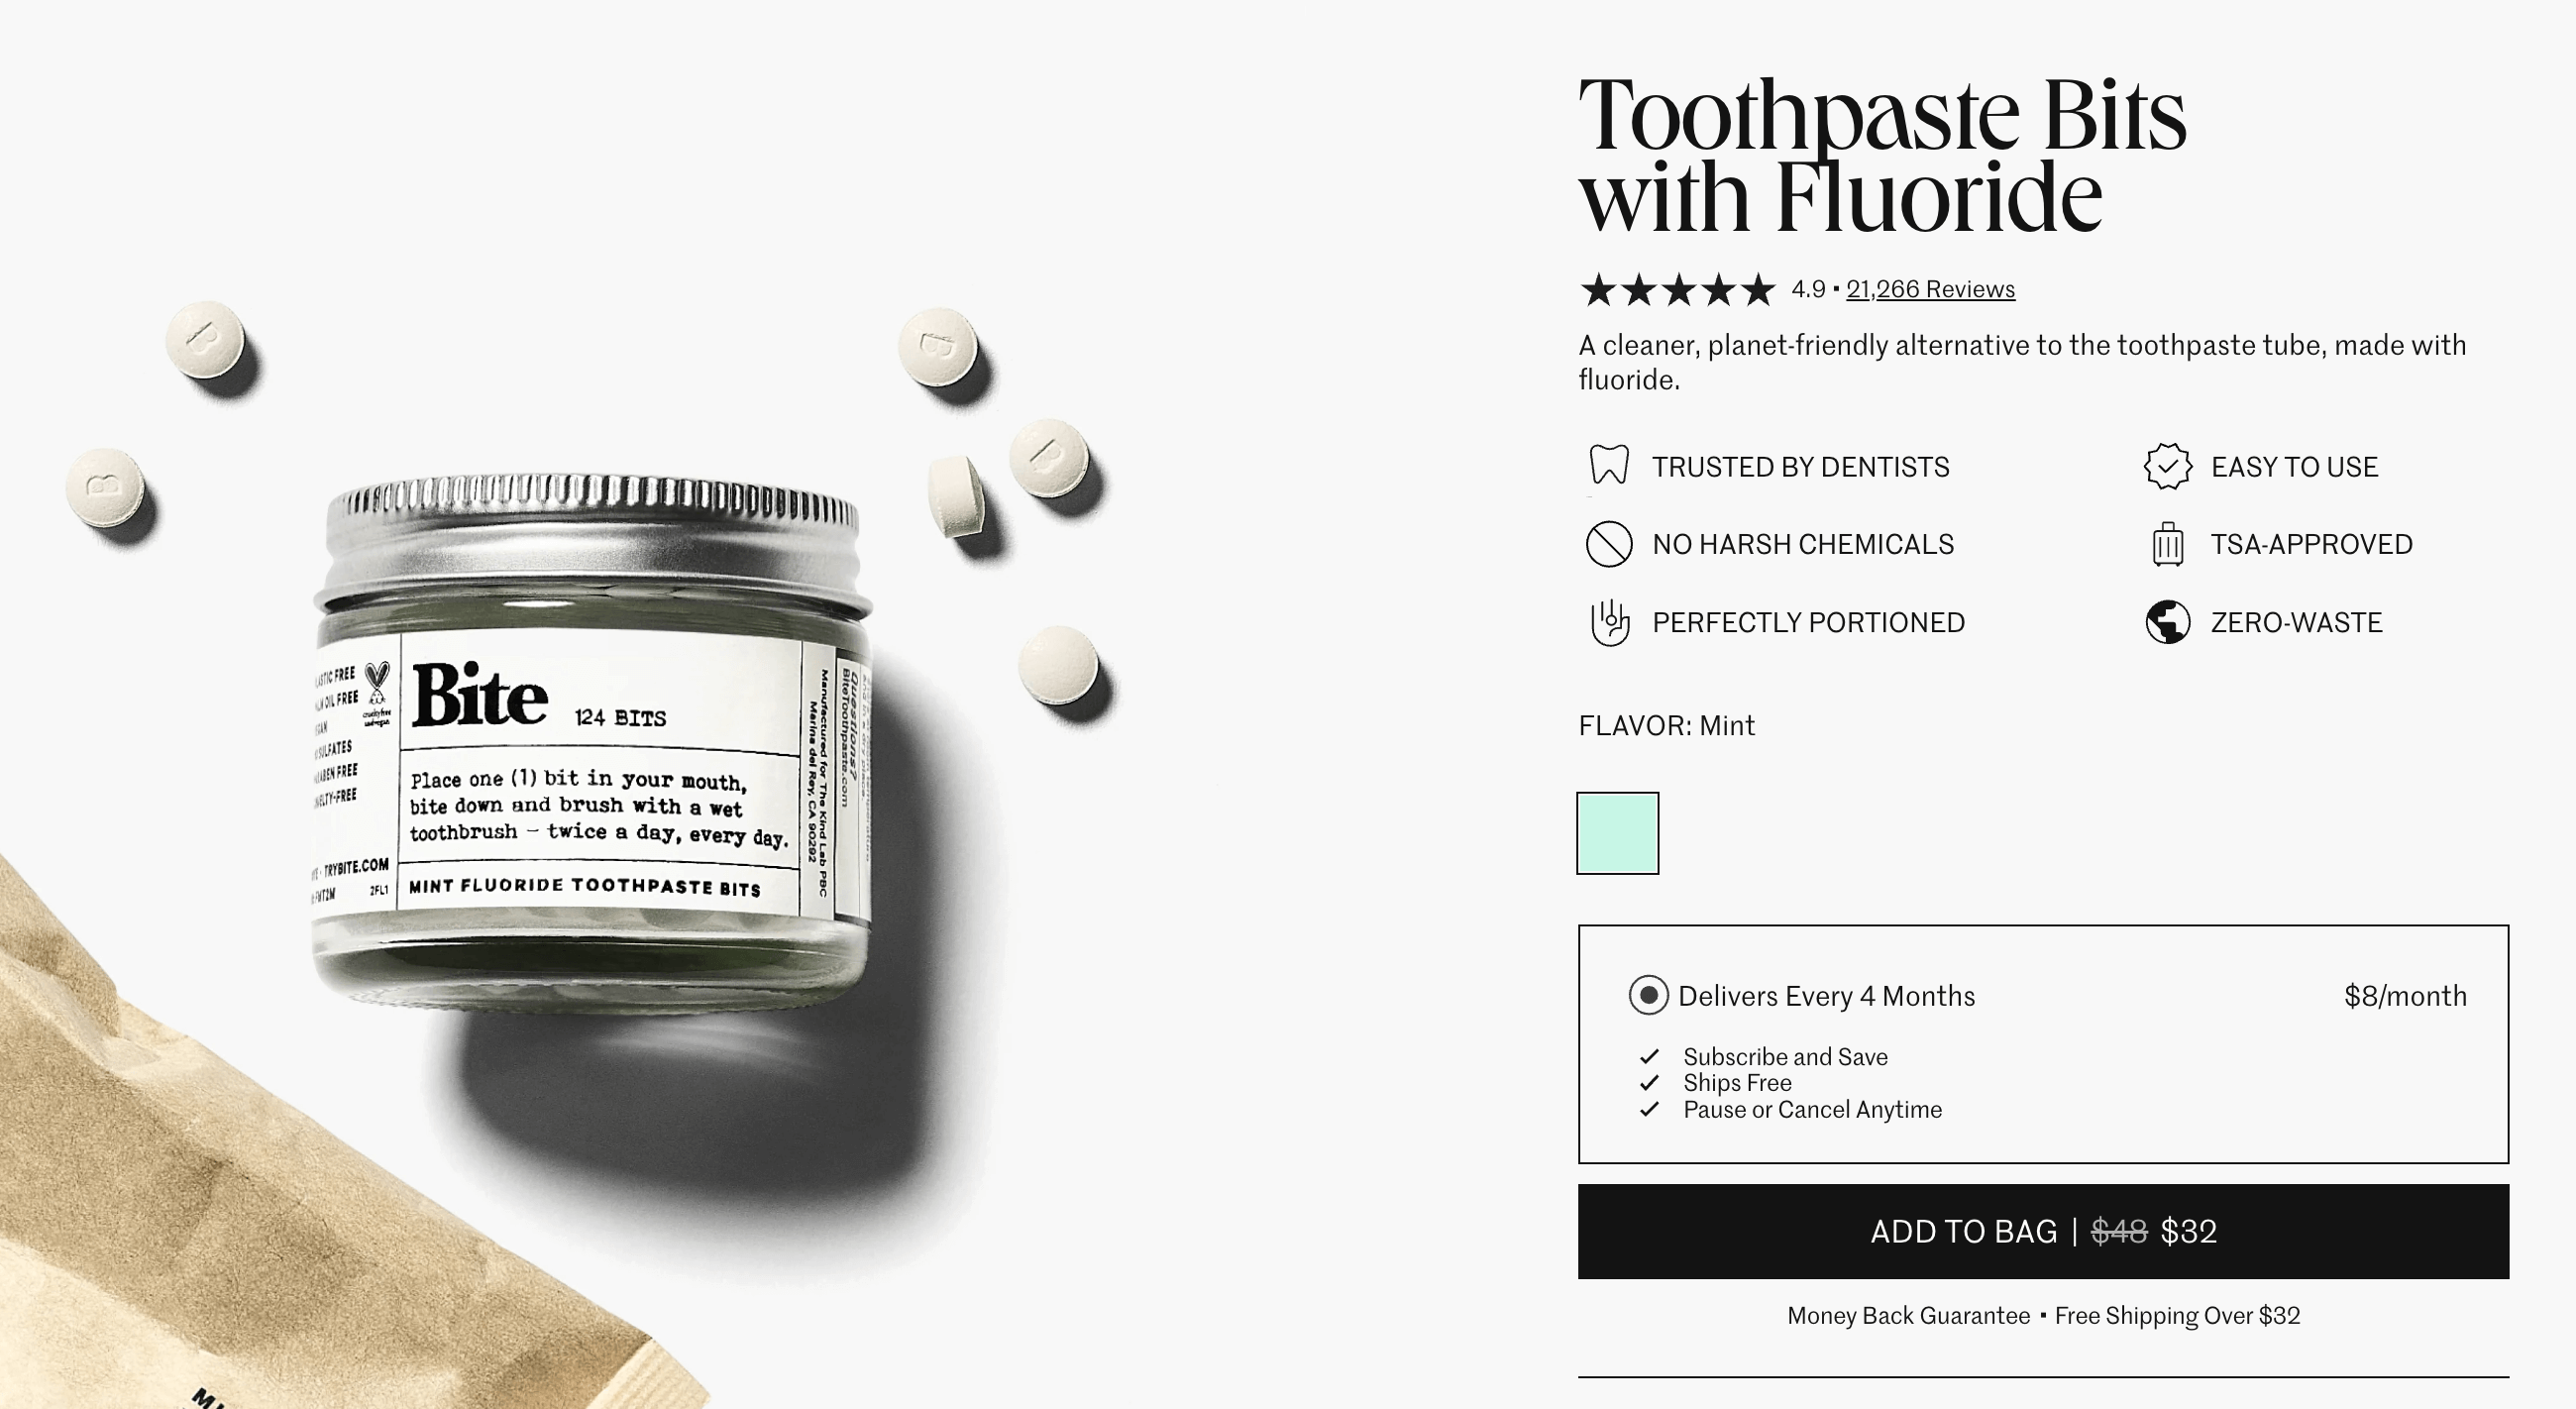 A screenshot of Bite's toothpaste subscription box, which ships on a four-month cadence.